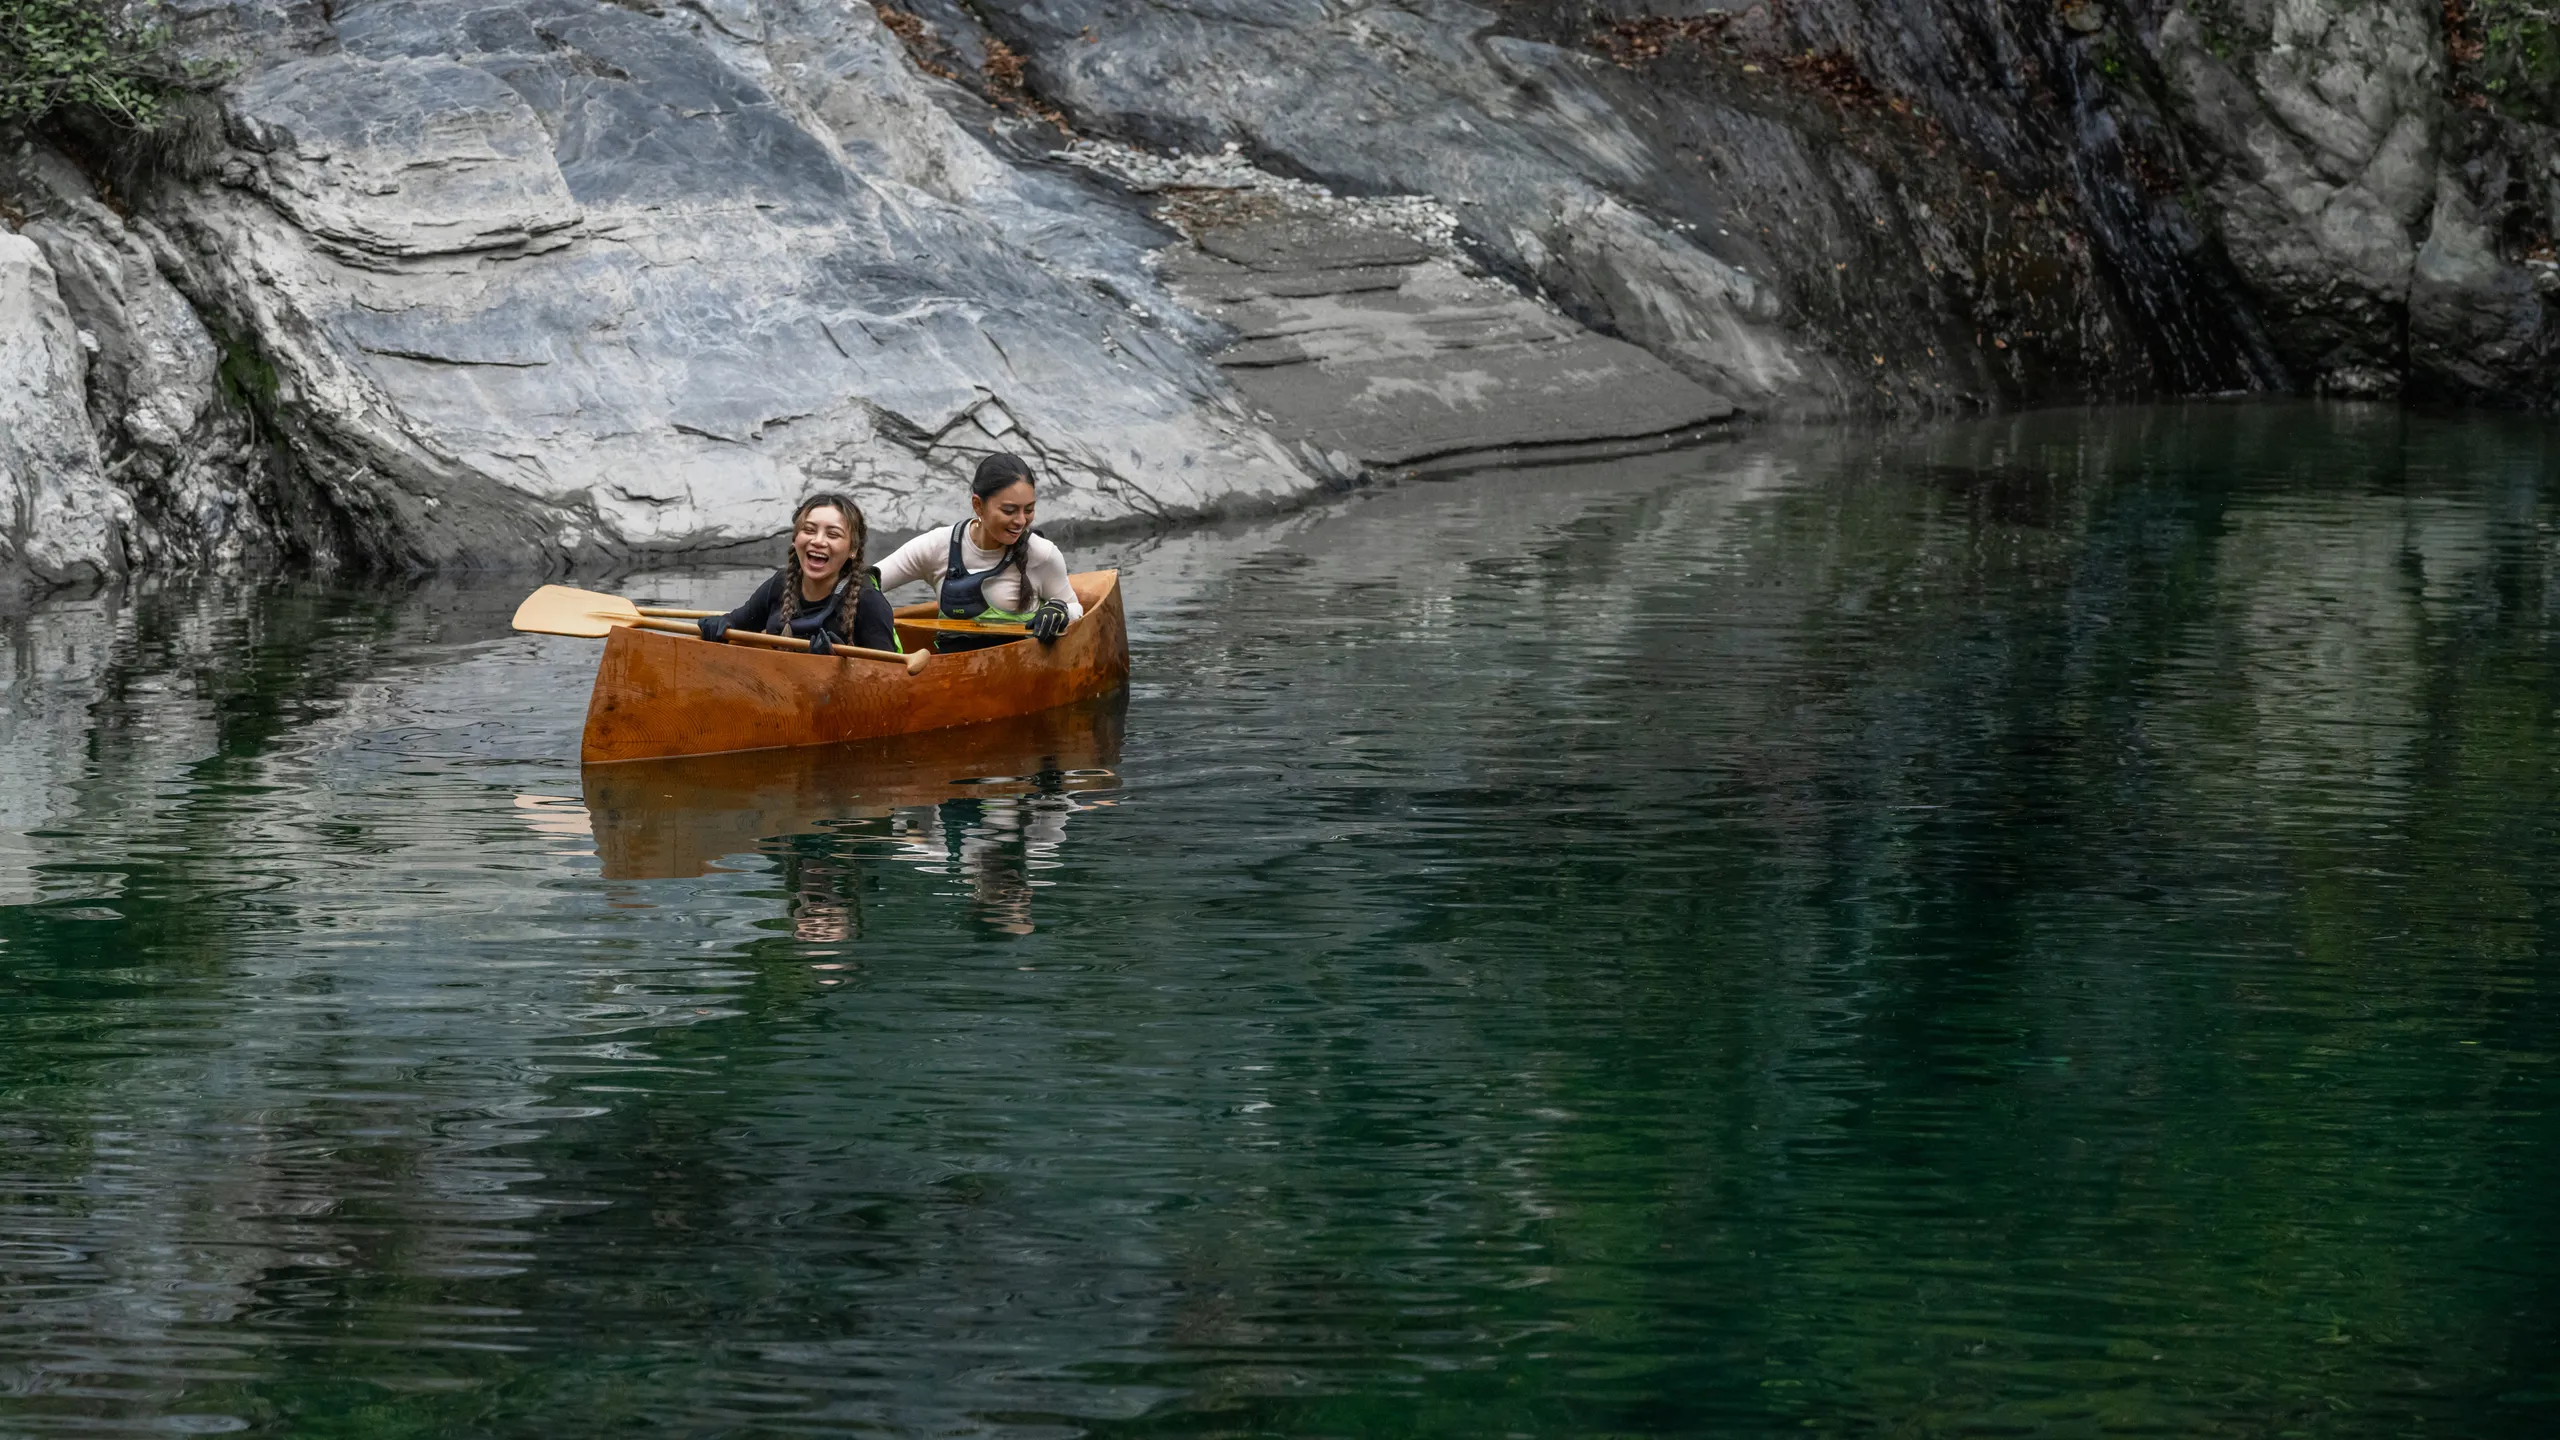 A ride on a canoe made of 100-year-old cedar & a wild game lunch